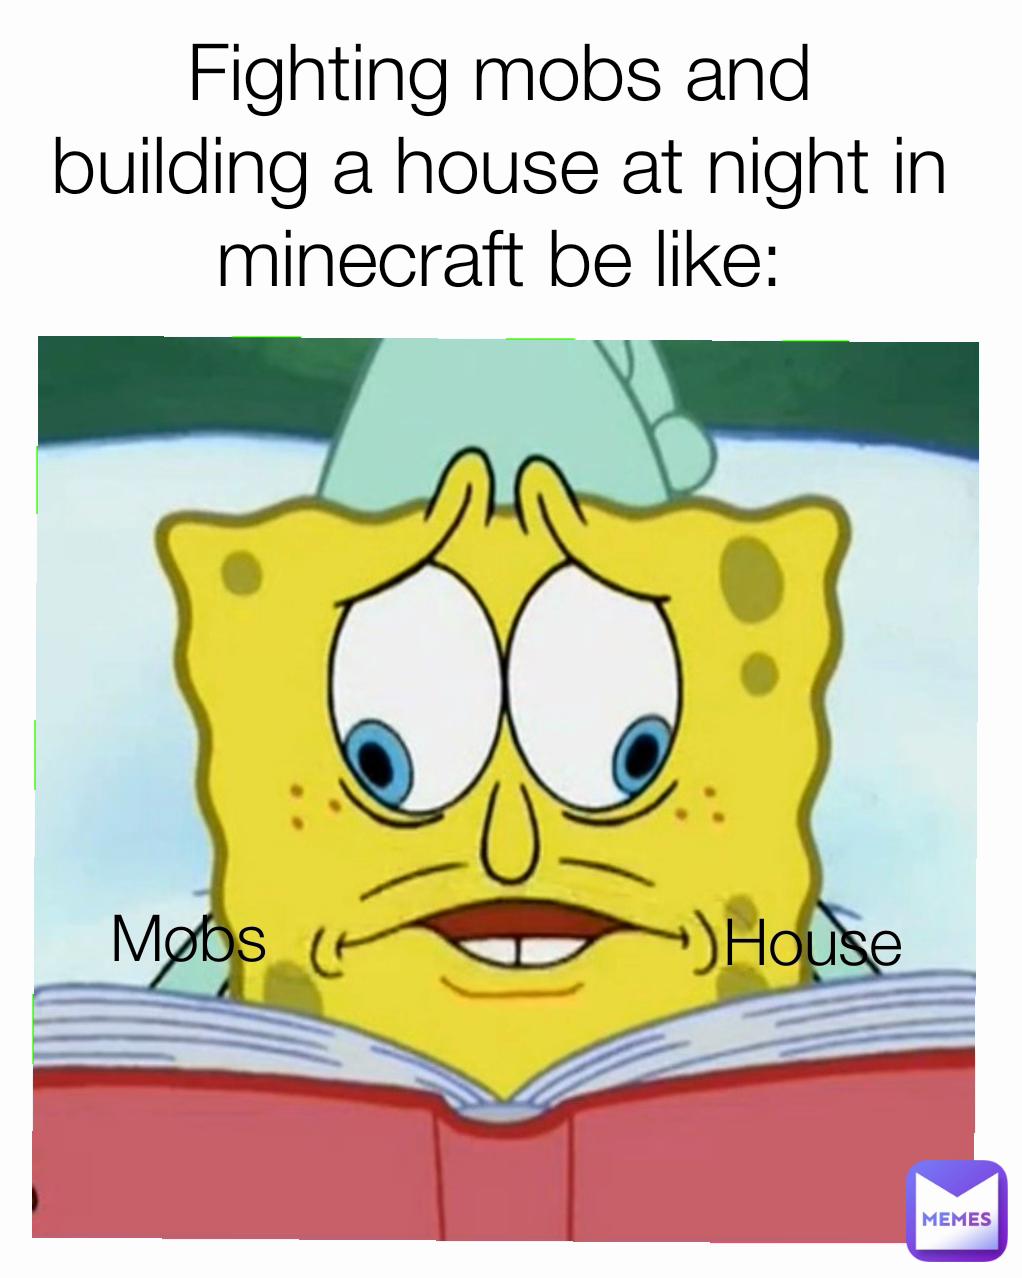 House Fighting mobs and building a house at night in minecraft be like: Mobs